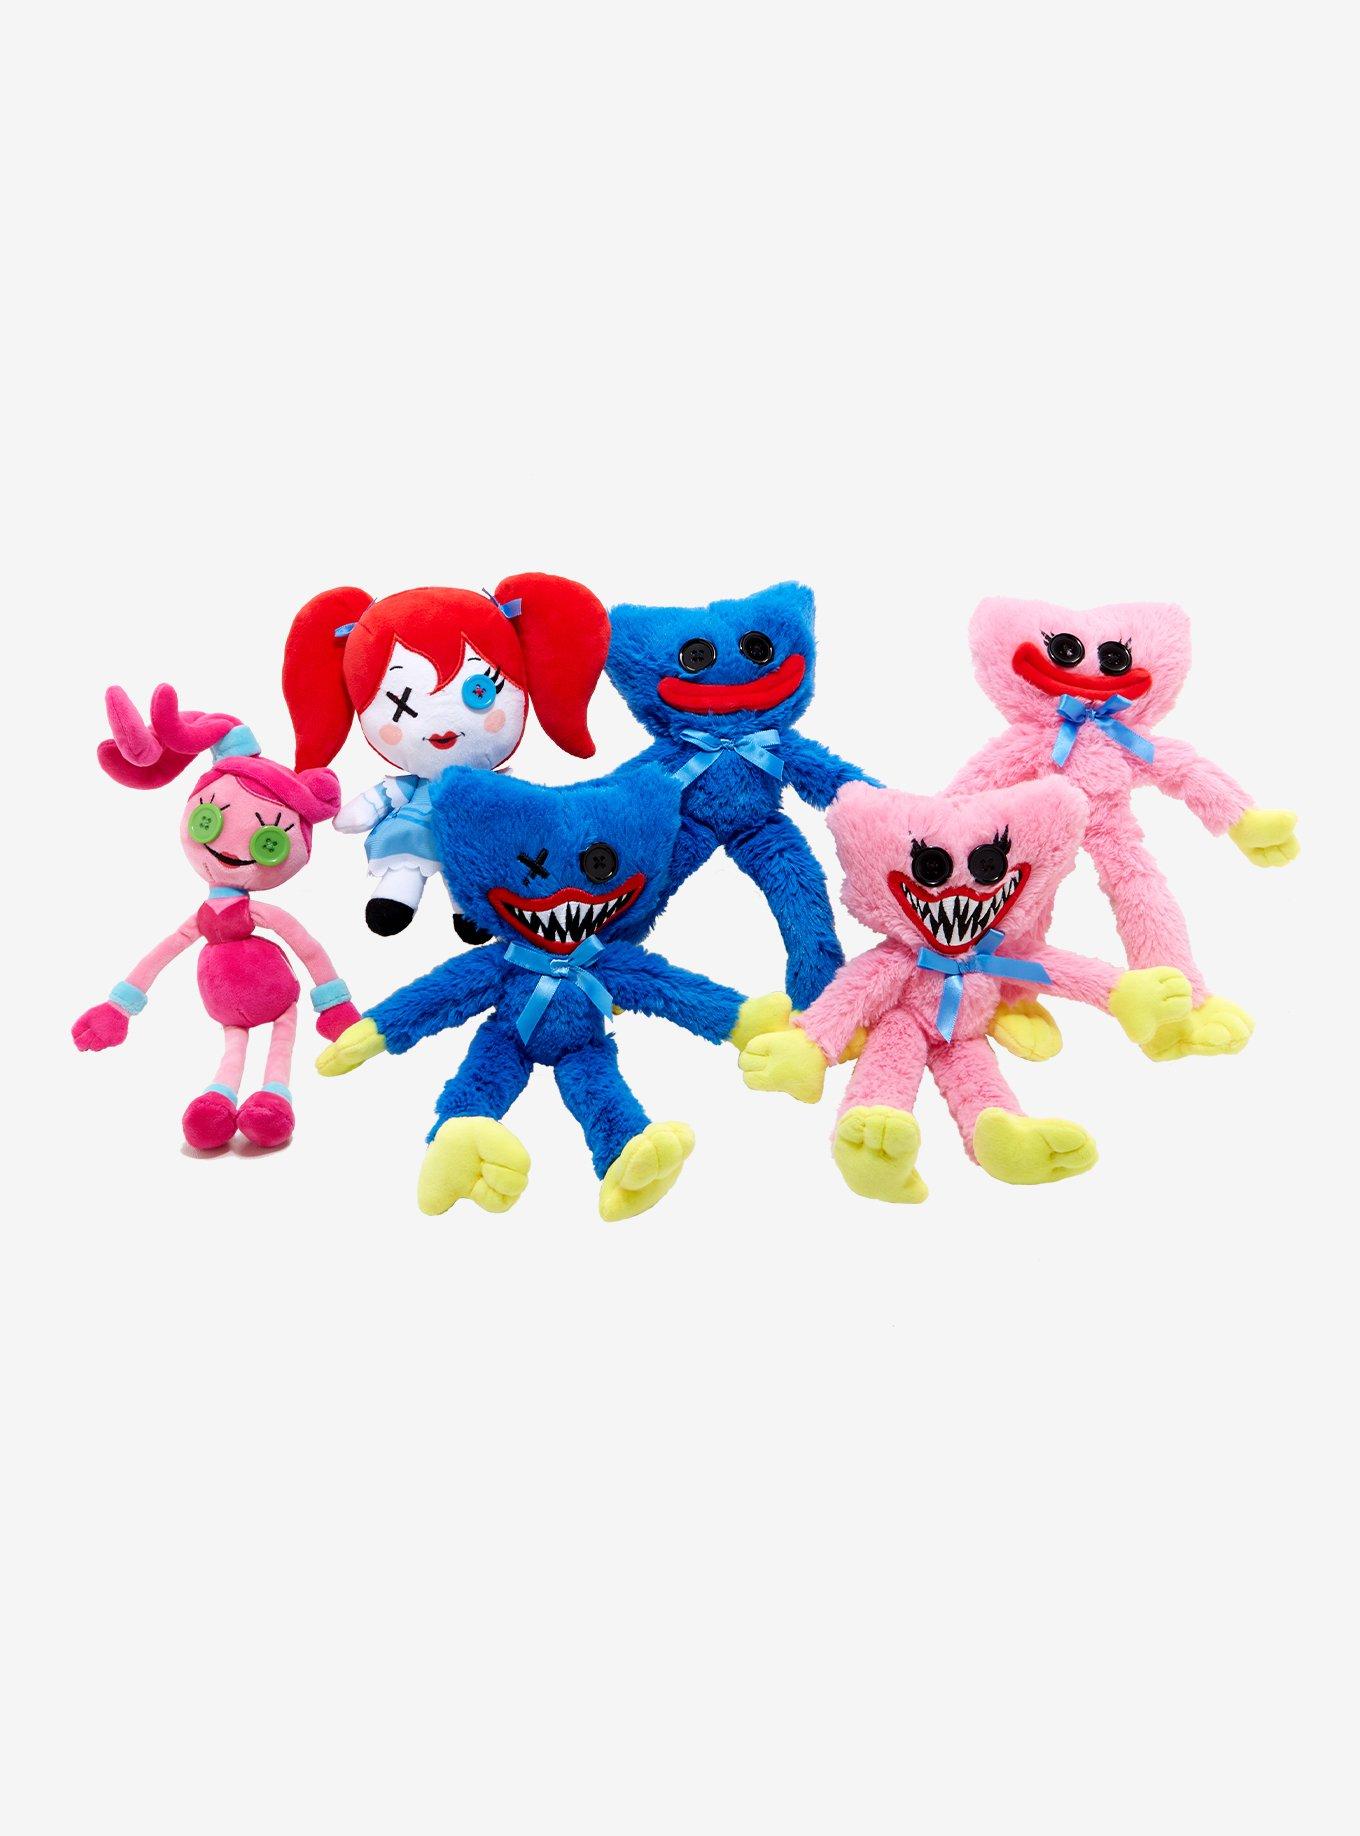 Poppy Playtime All Characters 